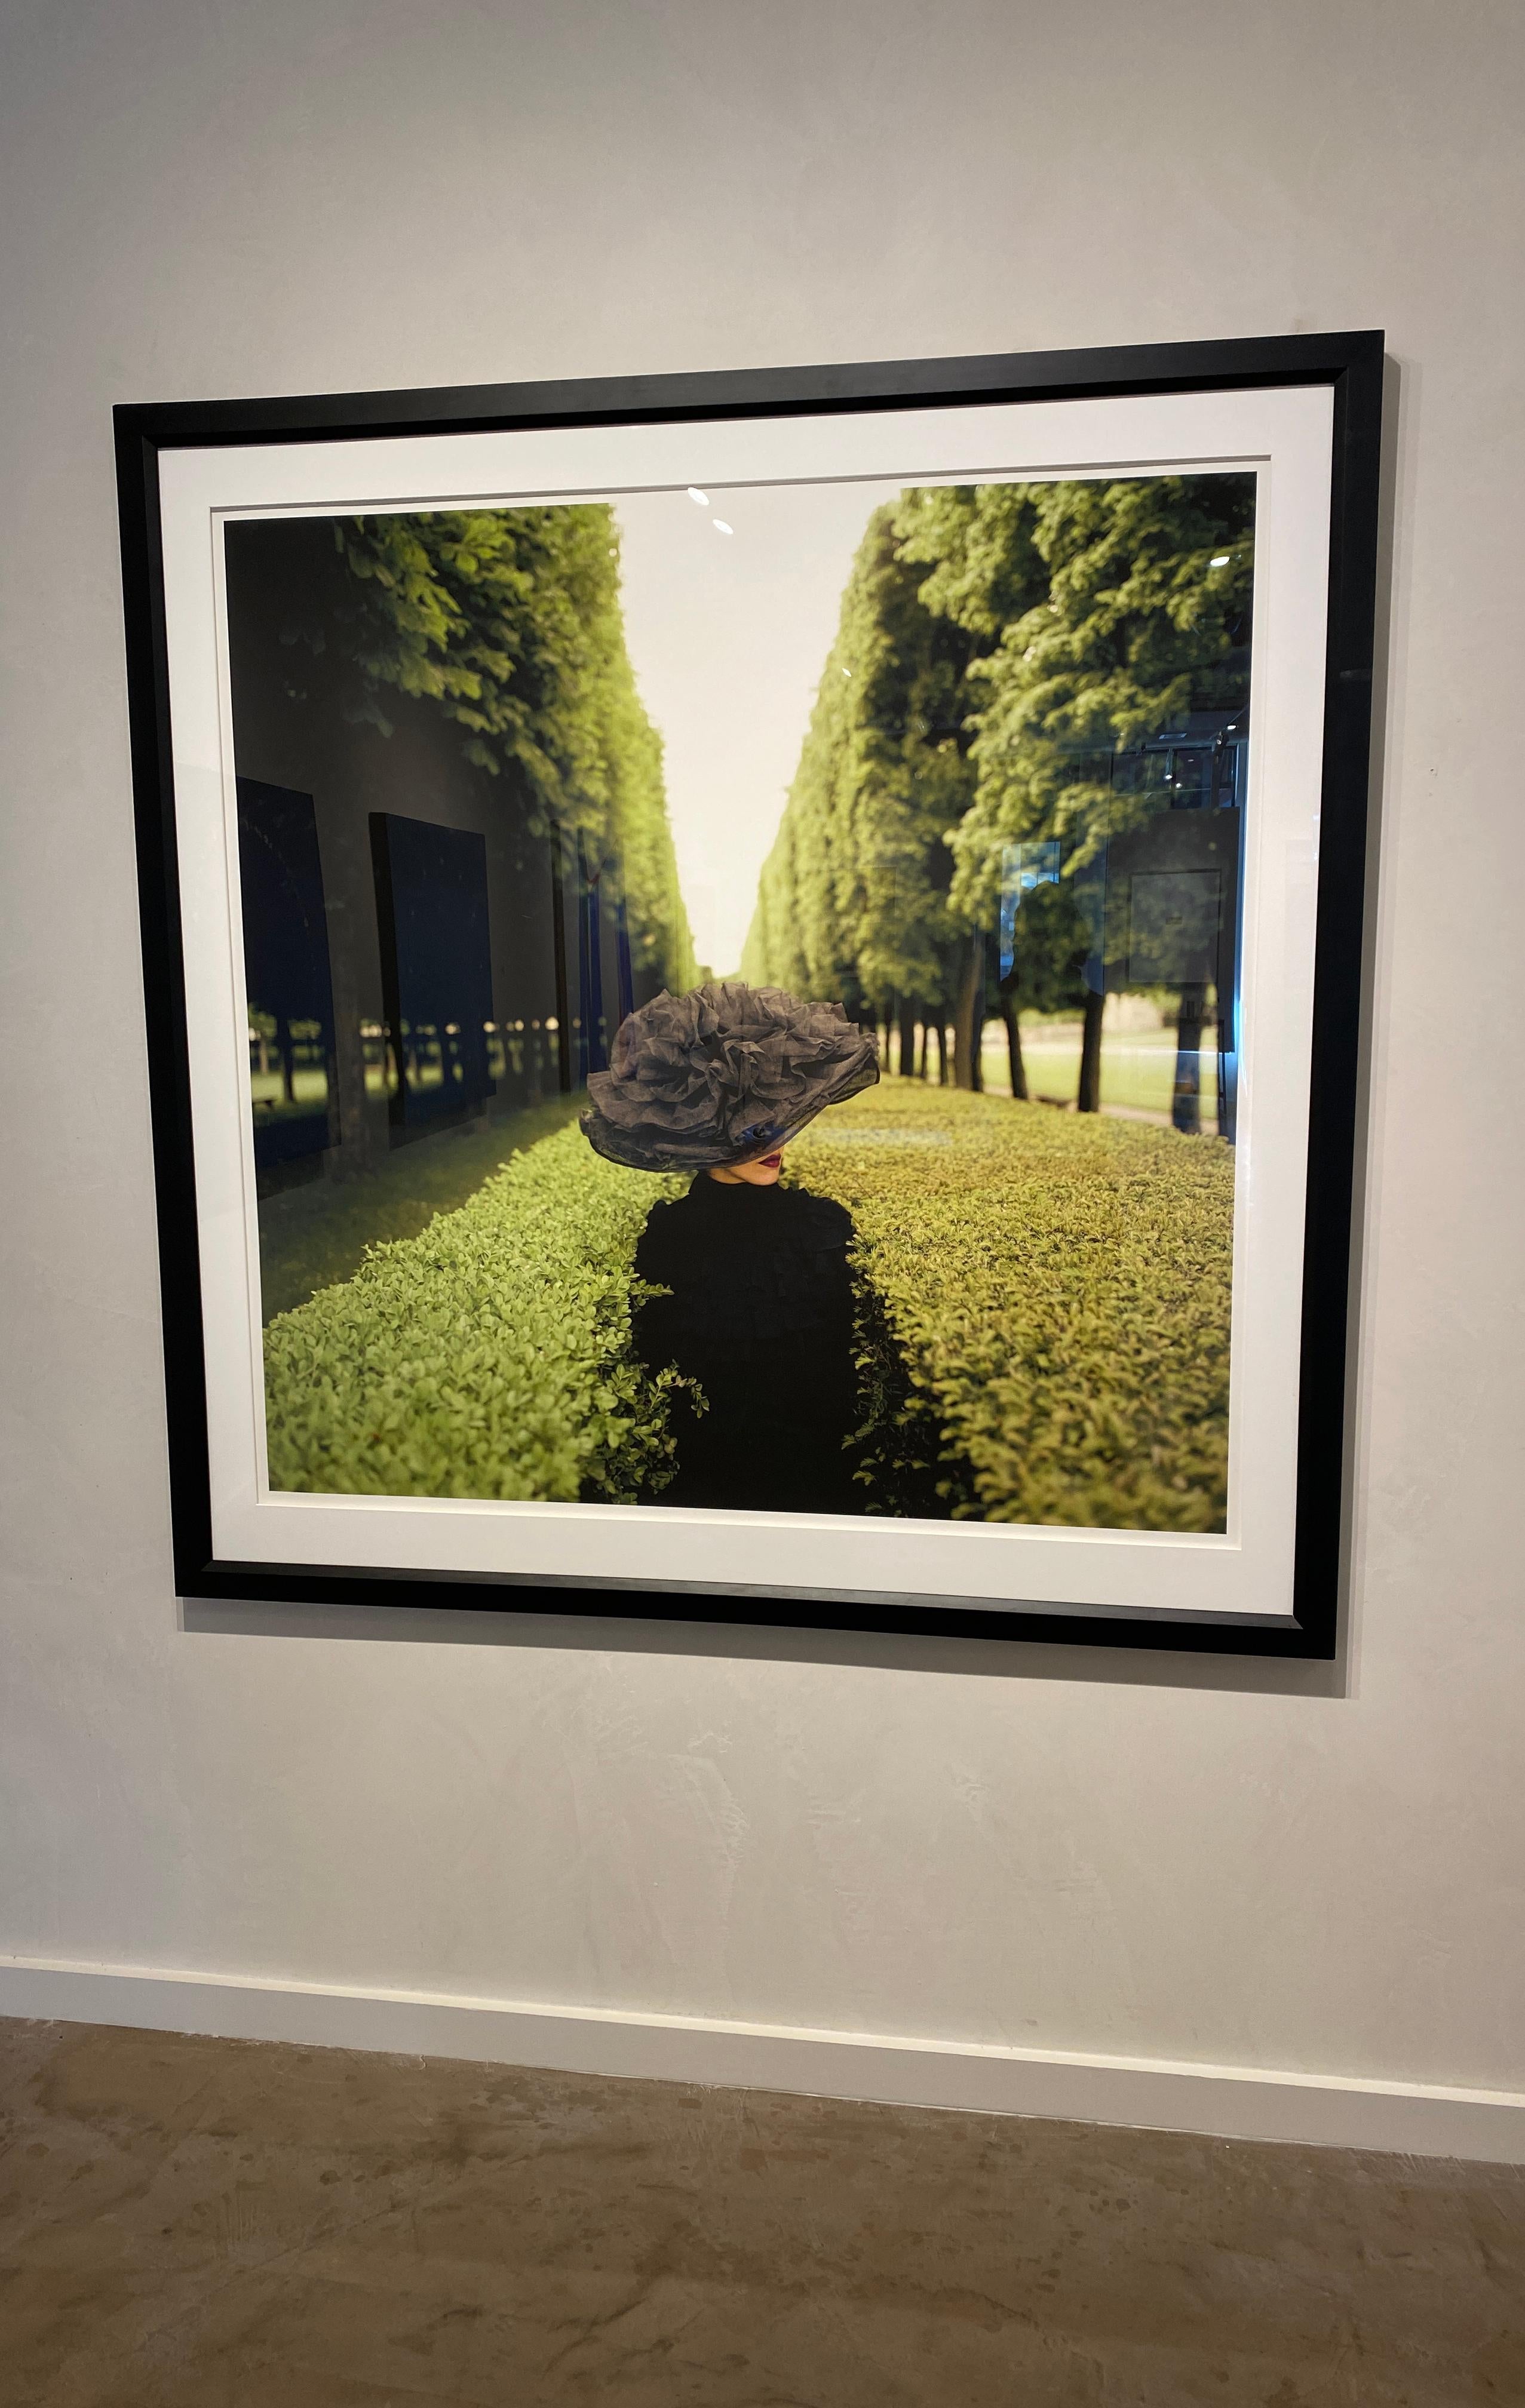 Color photograph of a woman in a wonderfully large and sculptural hat between lush green hedges in Paris.
Image size: 50 x 50 inches 
Framed size: 60 x 60 inches
Each image is part of an edition of 25. Price increases as the edition sells out. His